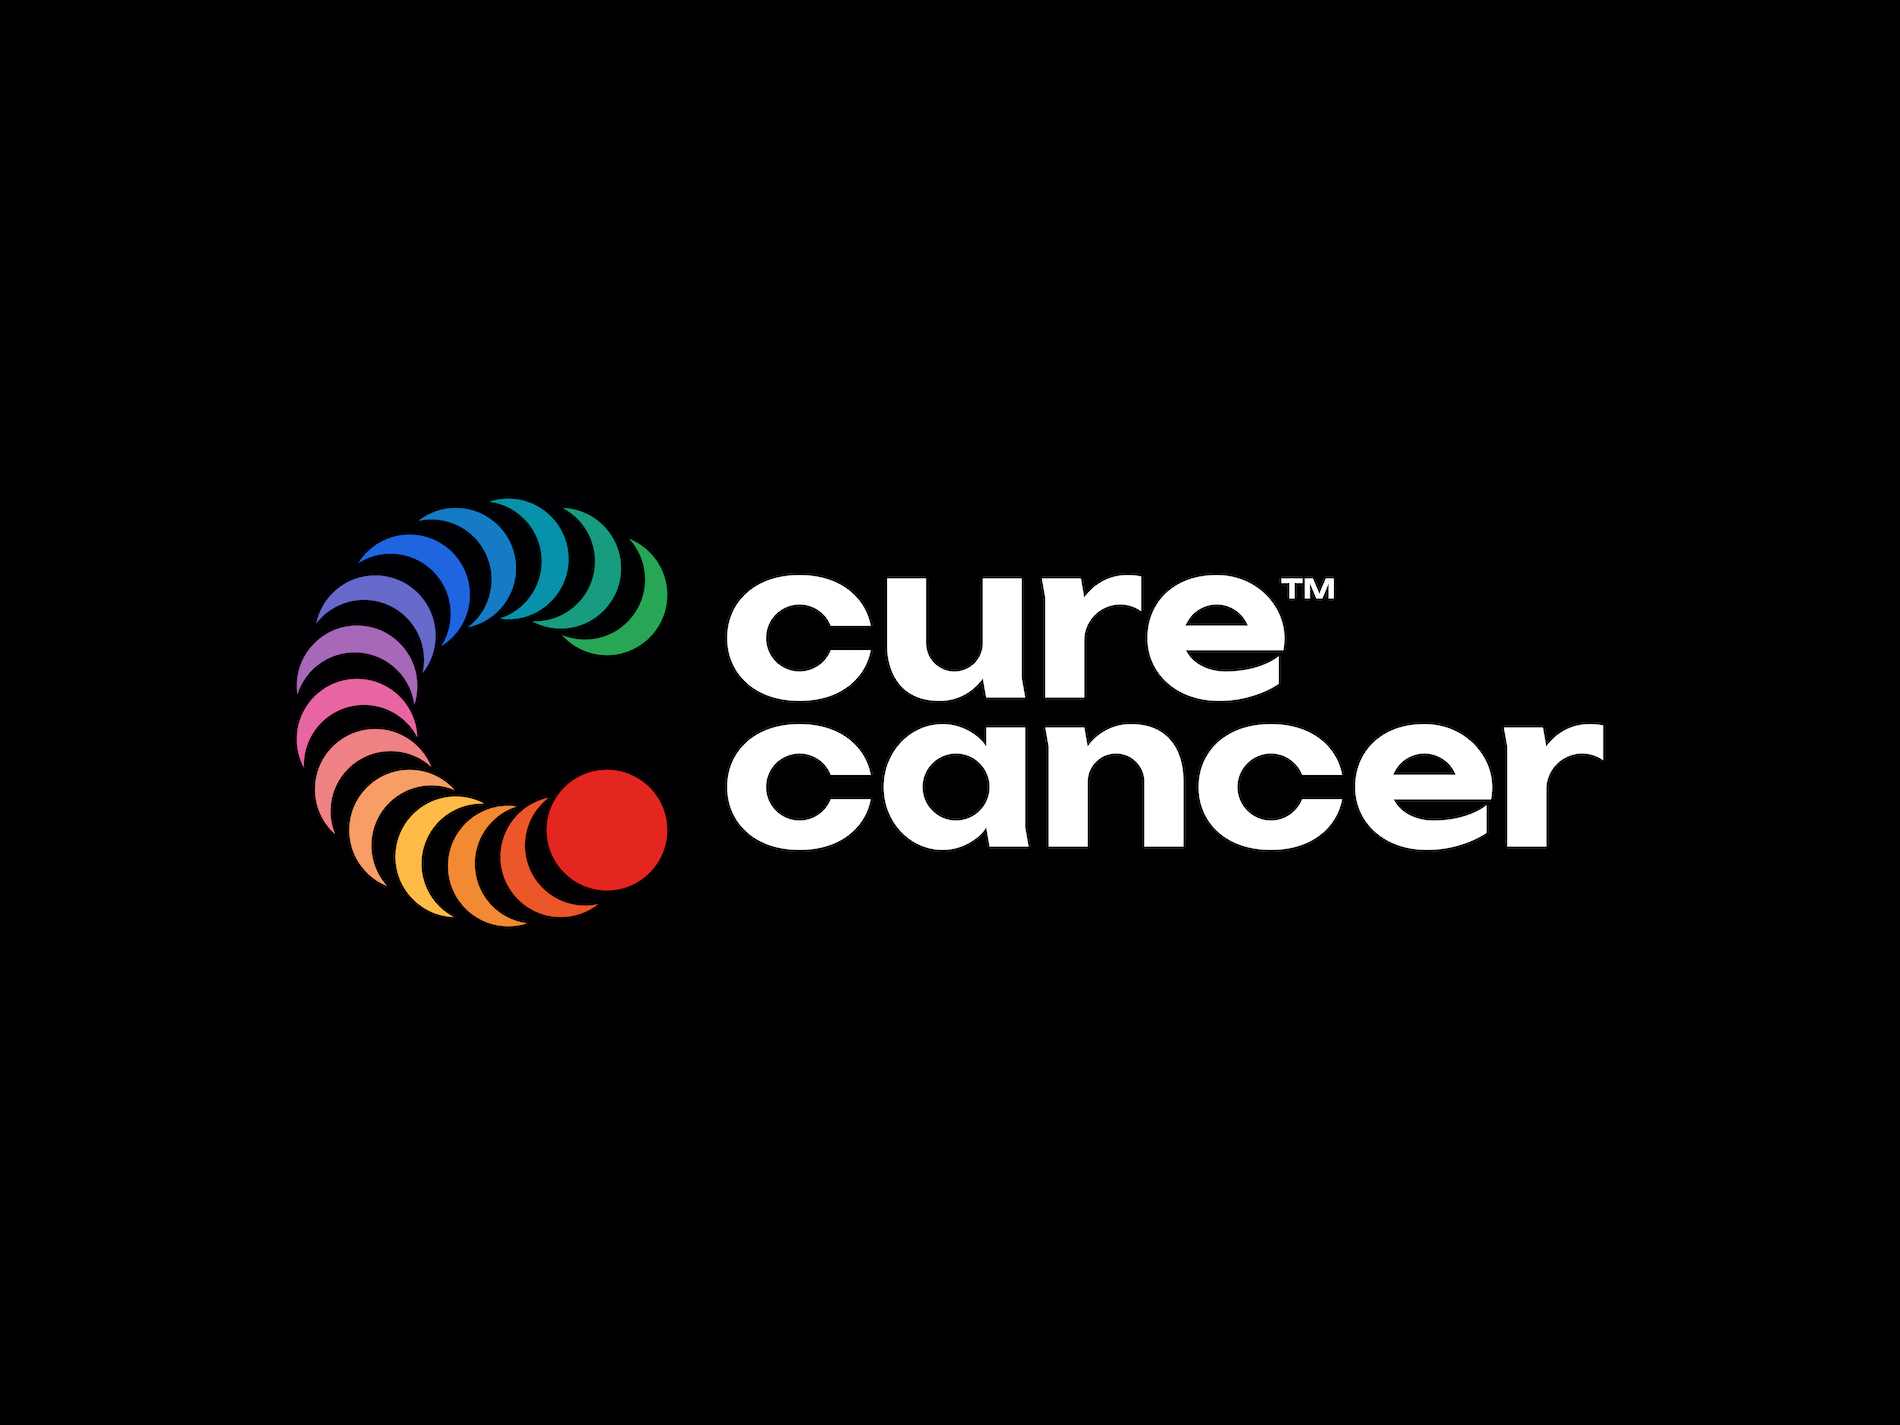 Non-profit Cure Cancer launches refreshed brand via Principals